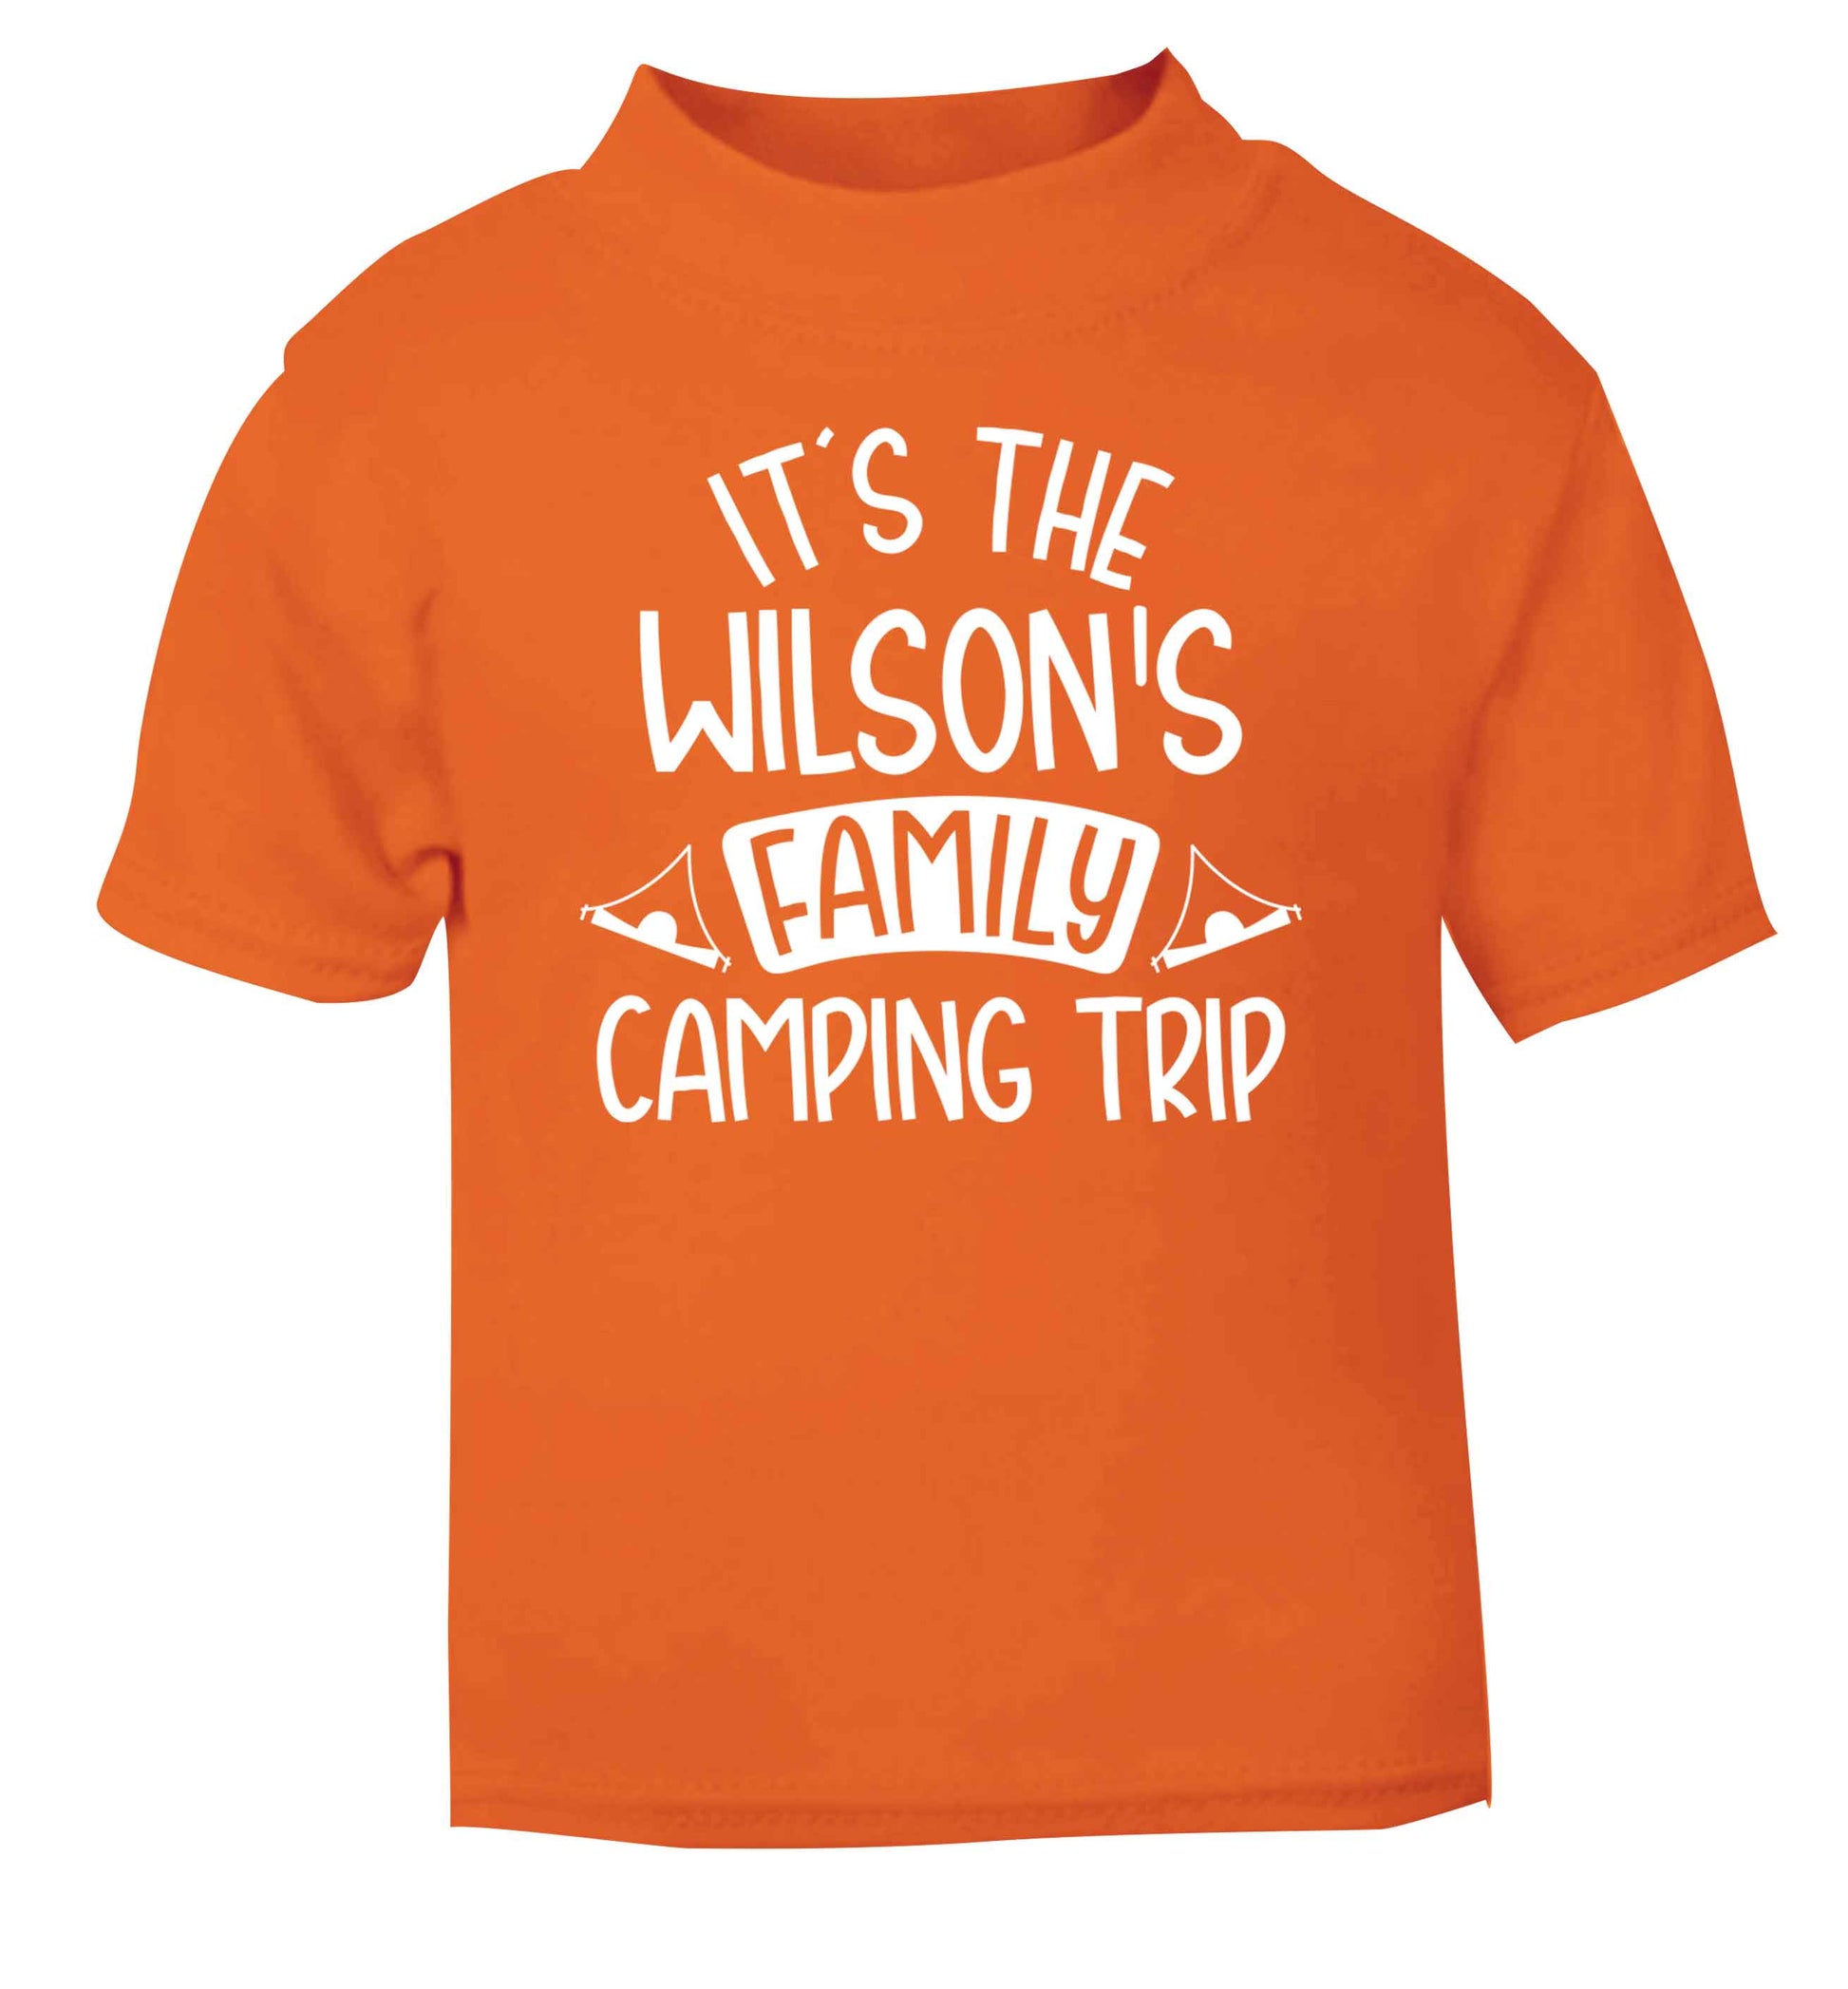 It's the Wilson's family camping trip personalised orange Baby Toddler Tshirt 2 Years